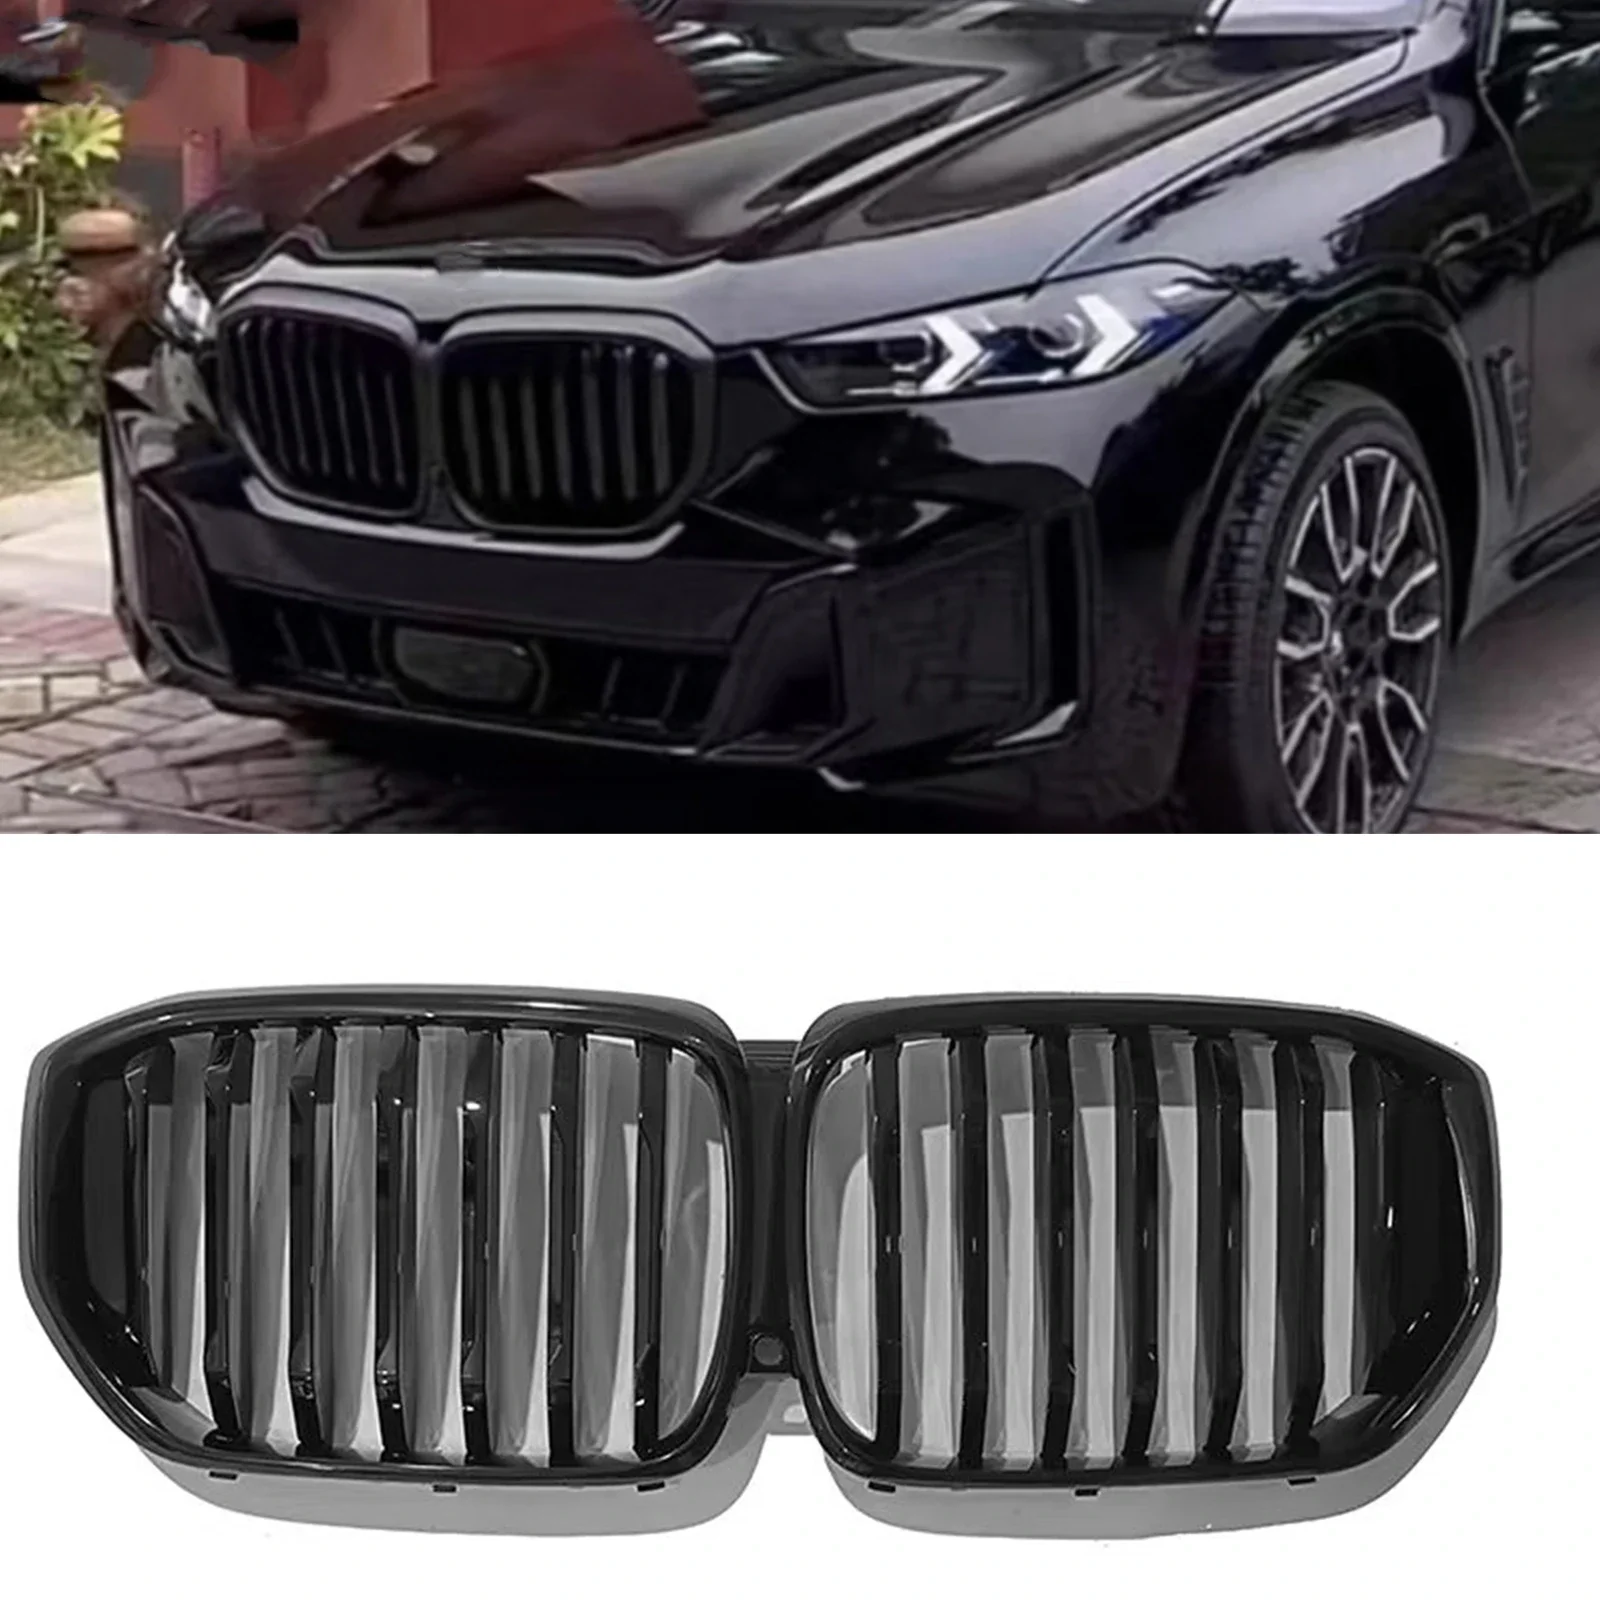 

New！ Front Grille Racing Grill For BMW G05 LCI X5 2023-2024 Single Slat Style Black Car Upper Bumper Hood Mesh Grid With Camera